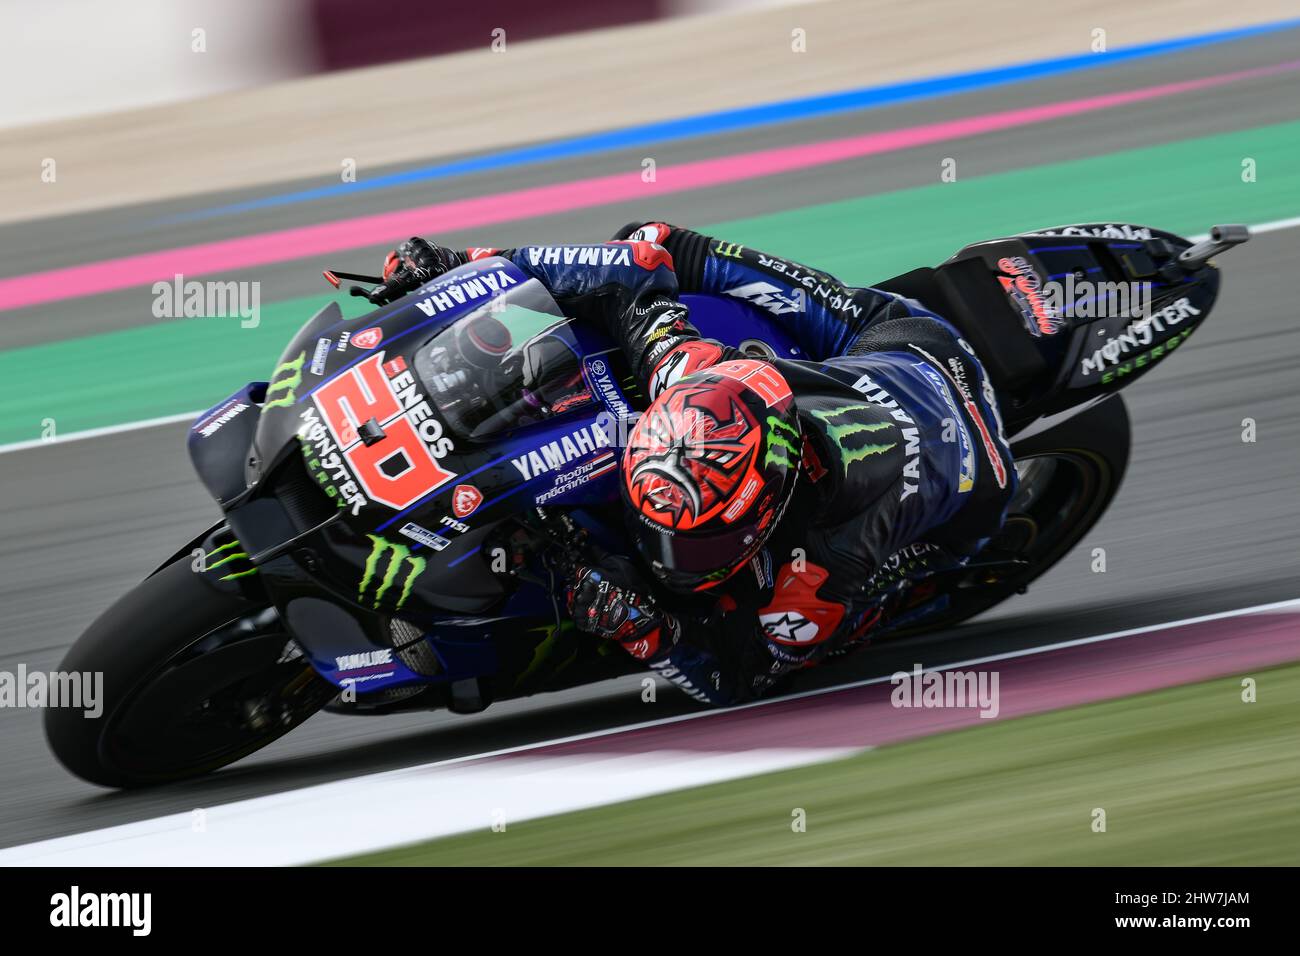 Fabio Quartararo of Monster Energy Yamaha MotoGP in action during Free Practice 1 at the Grand Prix of Qatar, Losail International Circuit on March 4th 2022 in Doha, Qatar